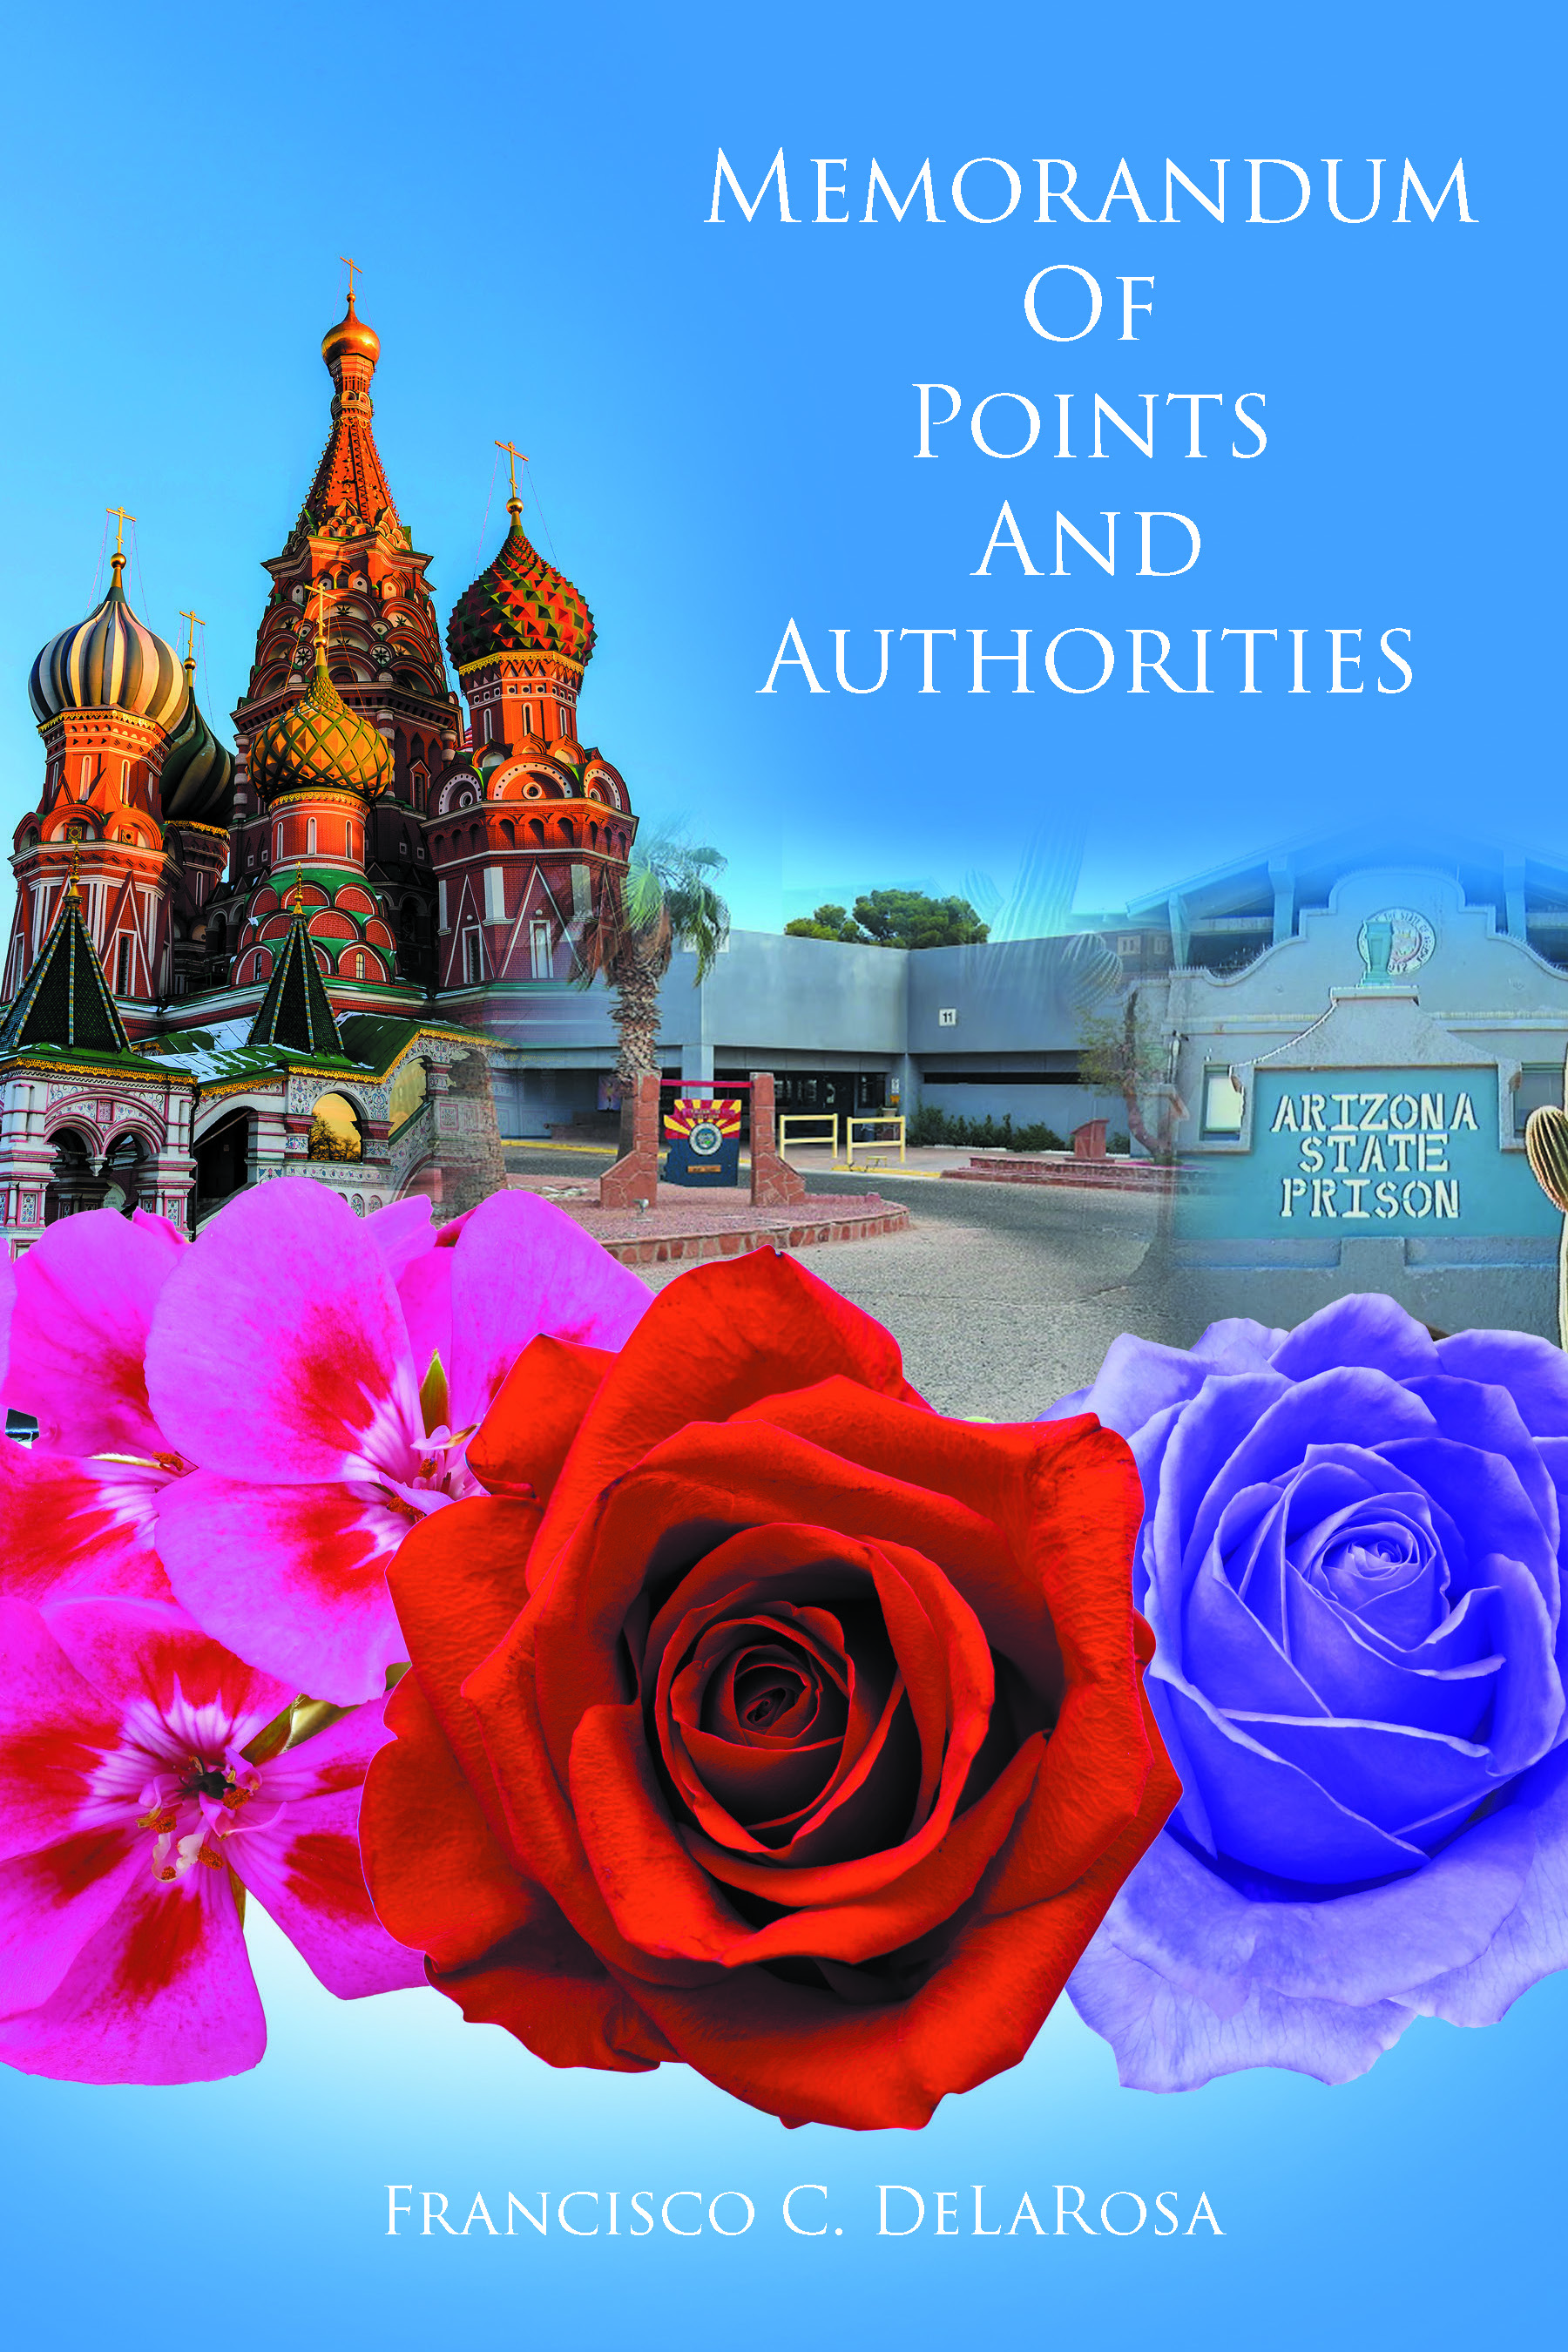 Author Francisco C. DeLaRosa’s New Book, “Memorandum of Points and Authorities,” is a Story Featuring America vs Russia in Court